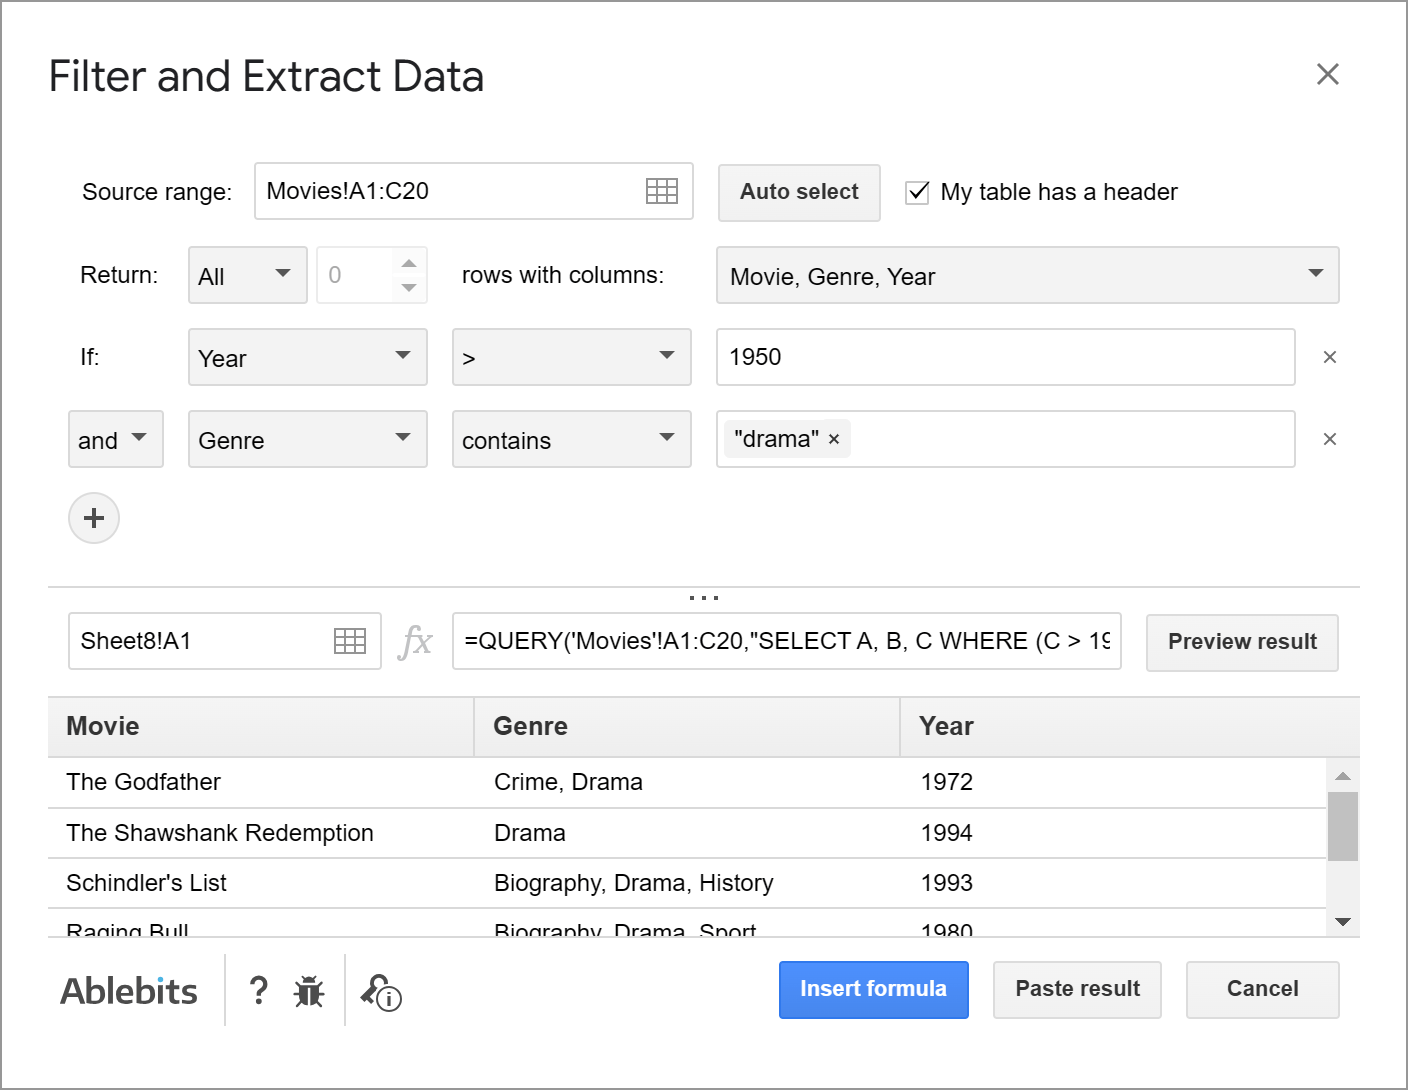 Filter multiple columns by multiple criteria at once with Filter and Extract Data.